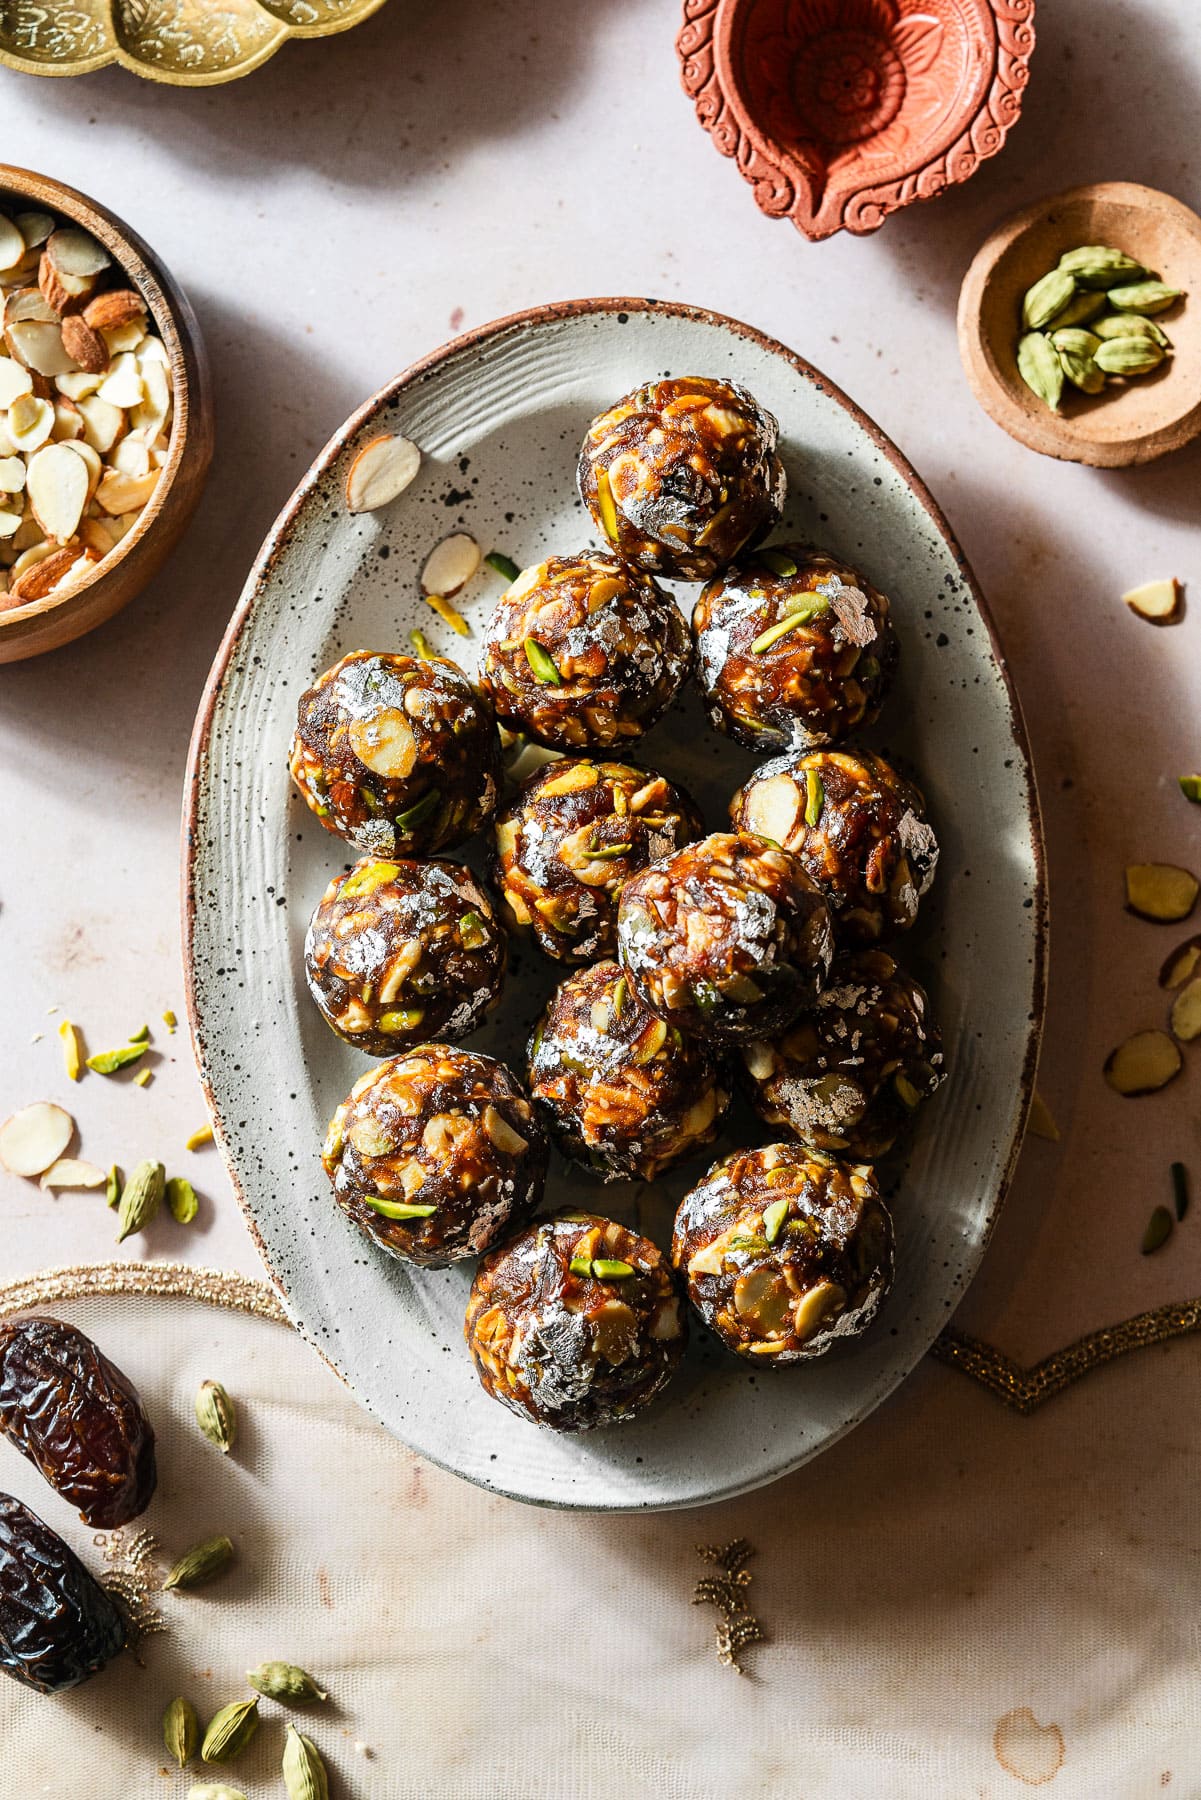 A dozen date nut ladoos in a platter surrounded by ingredients and a diya.